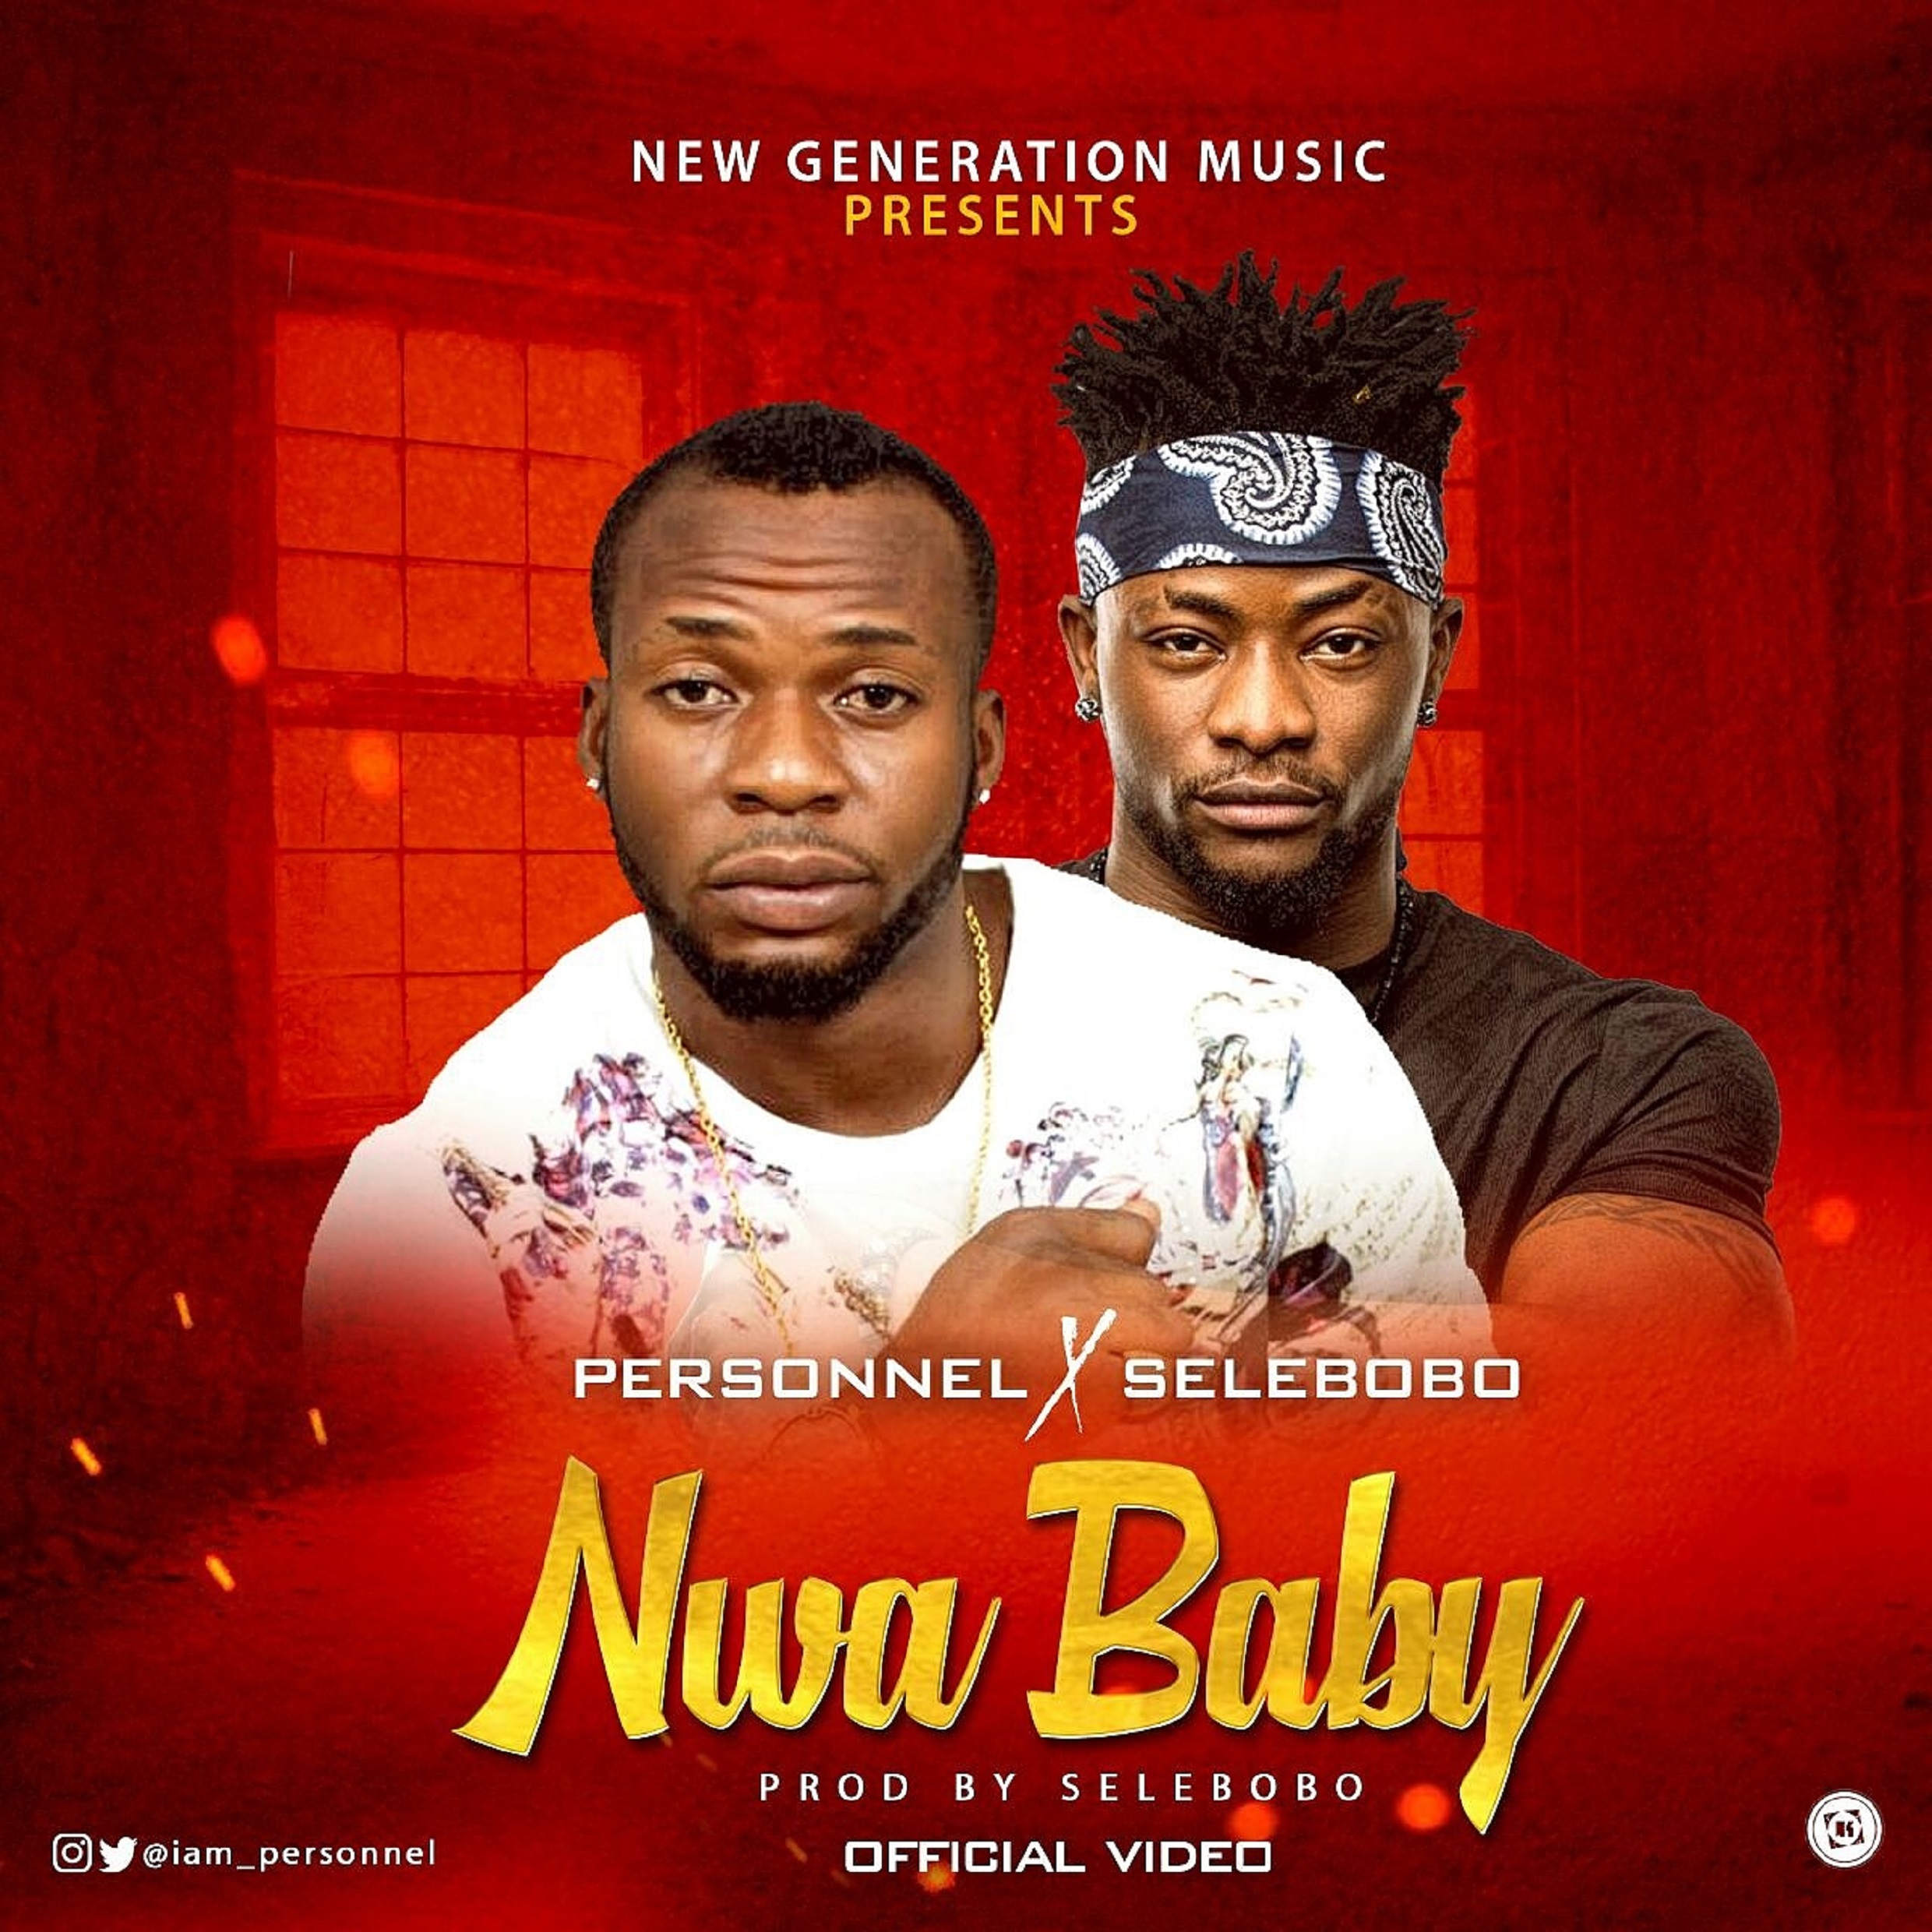 VIDEO: Personnel ft. Selebobo – Nwababy